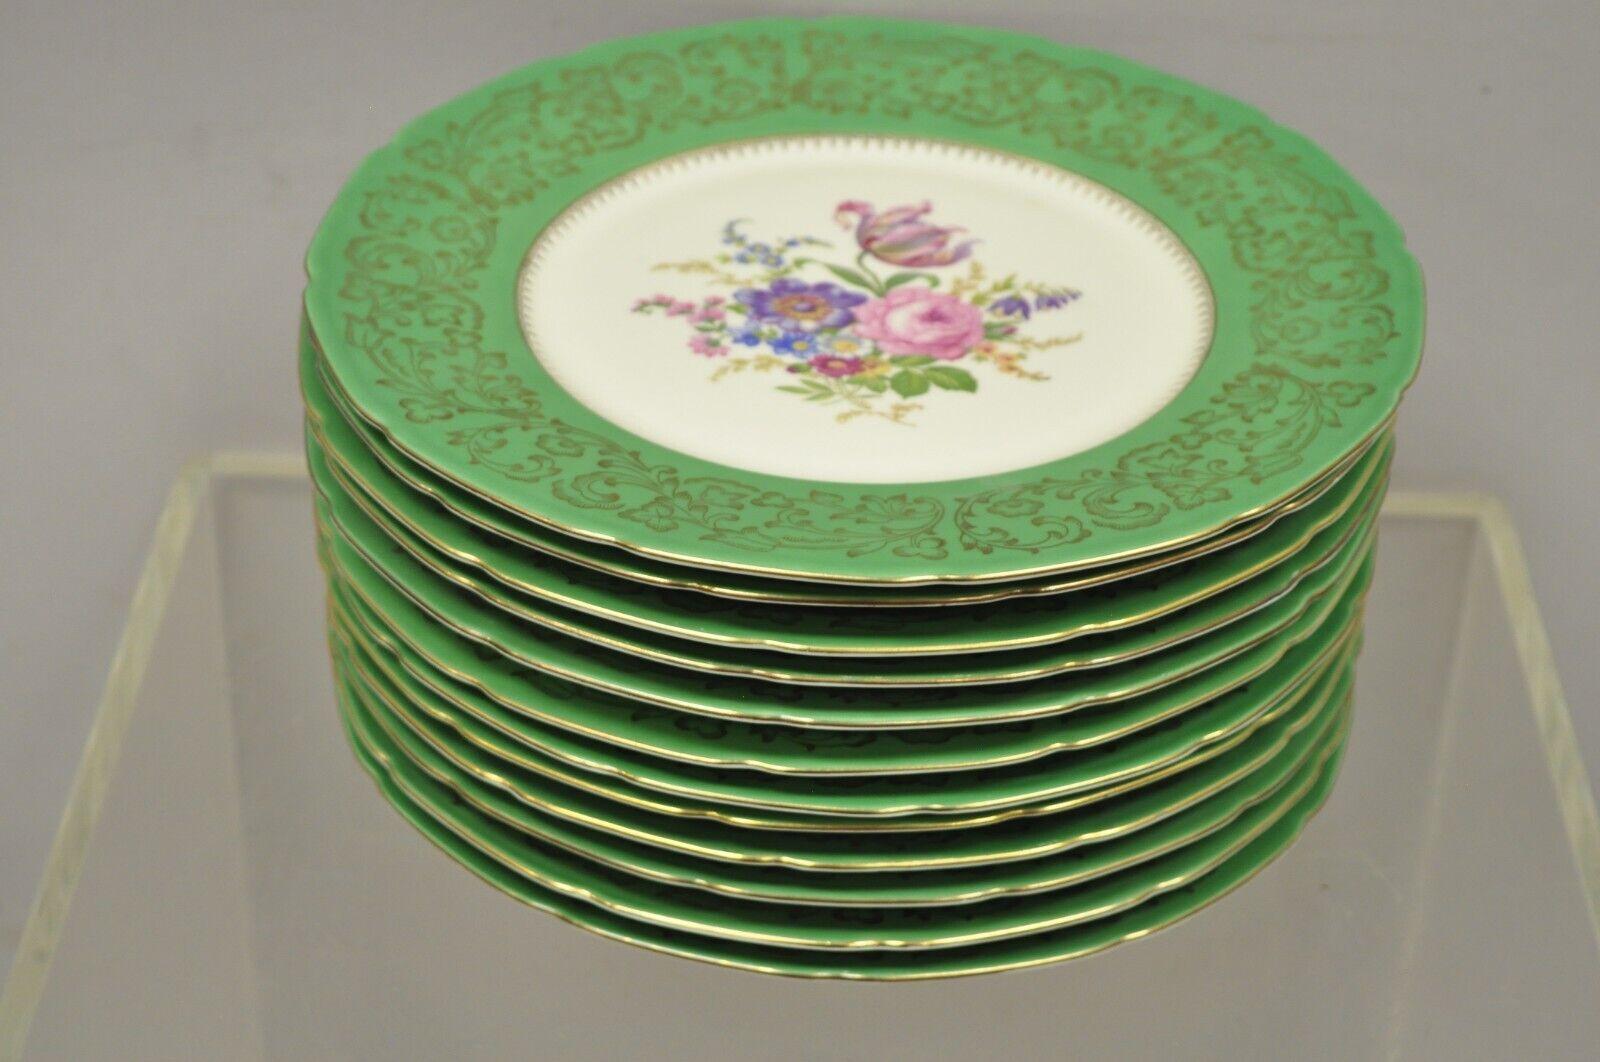 Baronet Bohemia Czechoslovakia floral green rim french dinner plates - Set of 12. Item features gold leaf decorated rim, floral painted center, green boarder, original stamp, very nice antique set. Circa Early 1900s. Measurements: 0.5